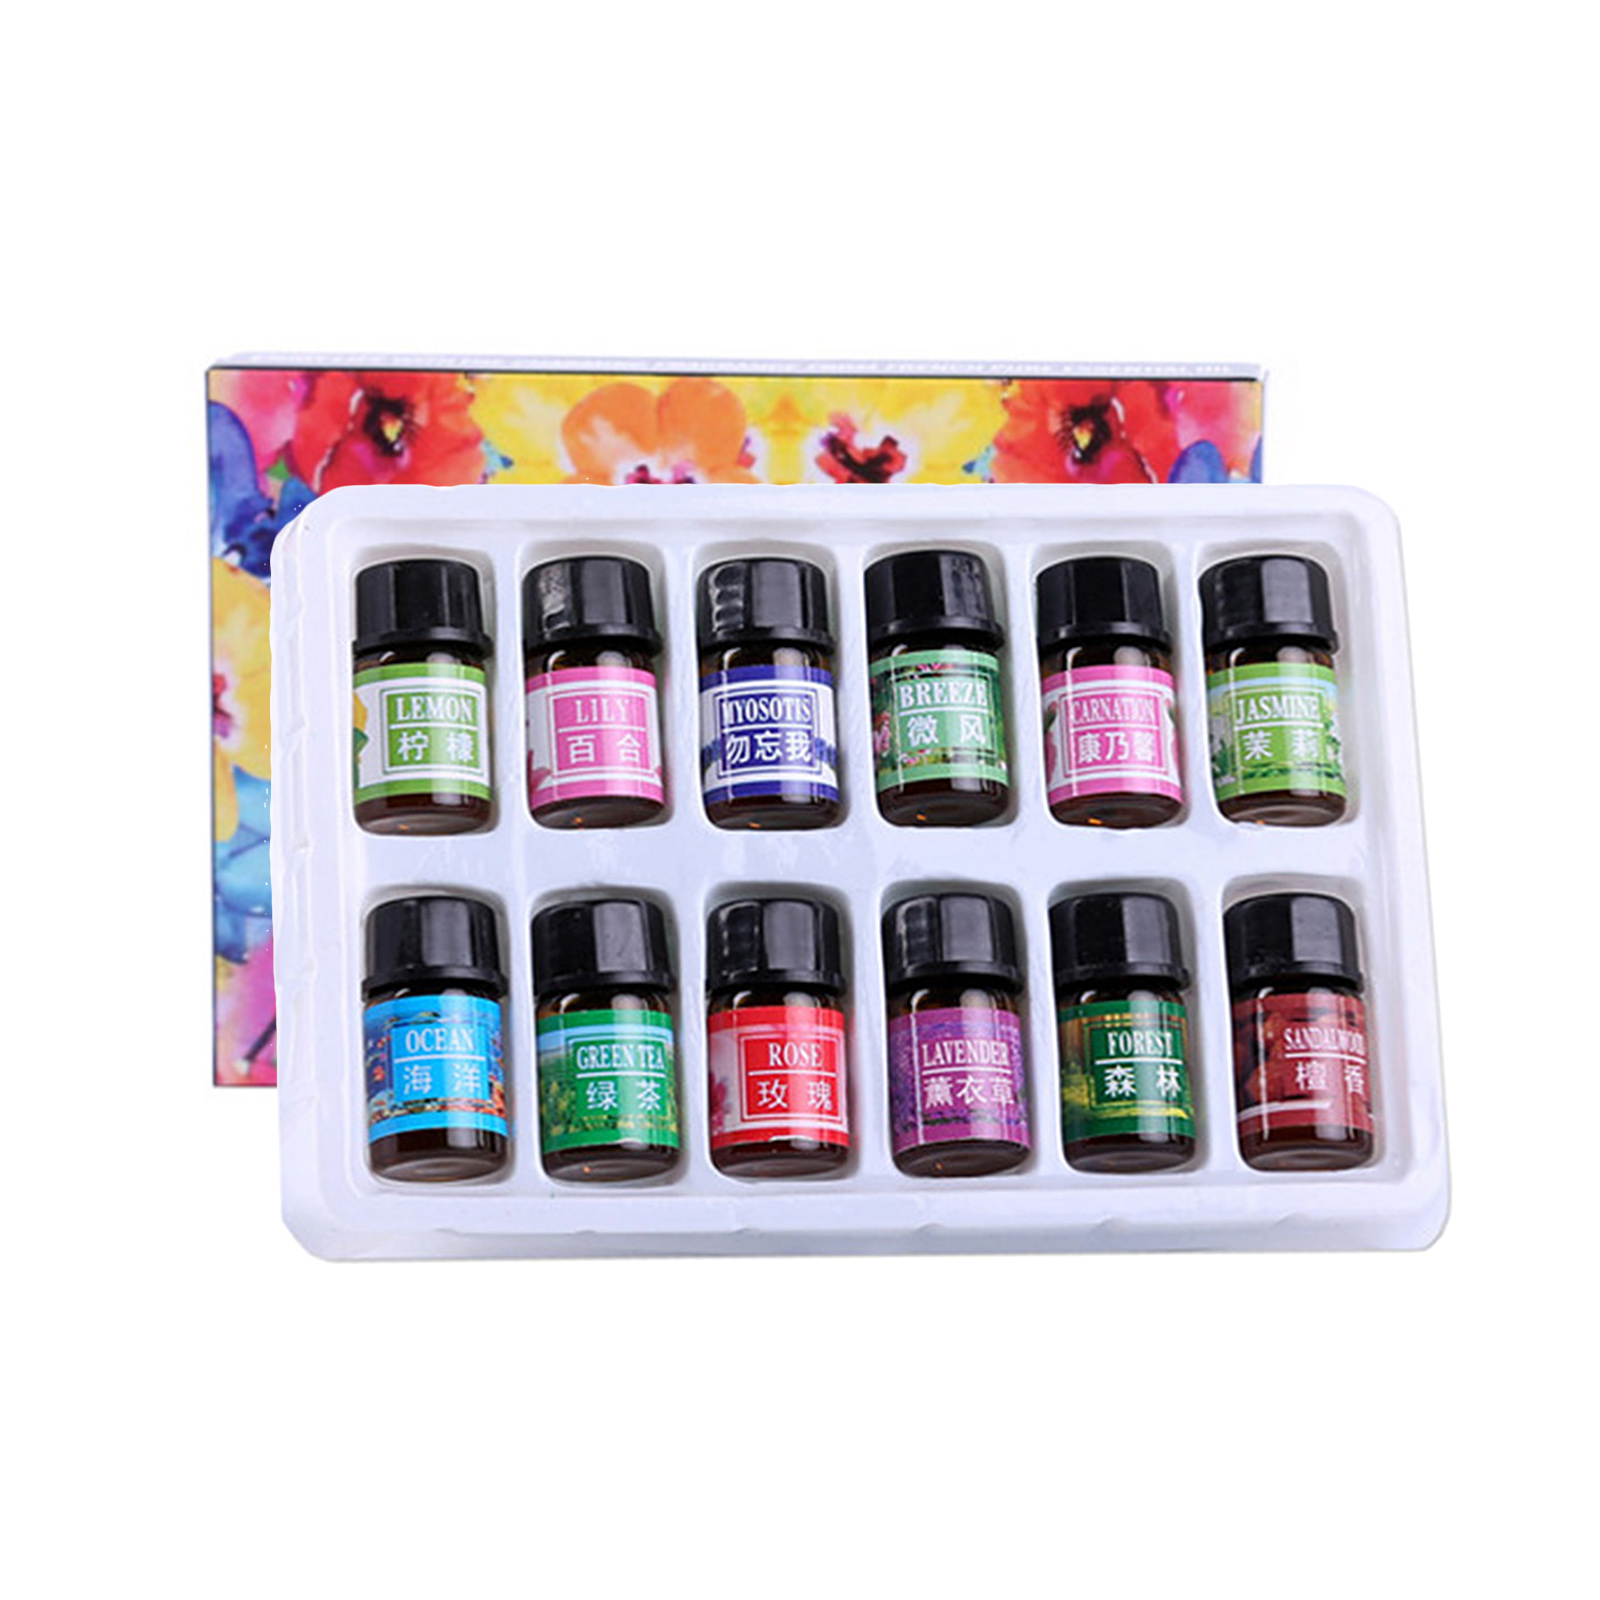 Walmeck 3ML 12PCS Natural Set Water-soluble Aroma Essential Aromatherapy Oil for Oil Diffuser Humidifier - image 1 of 7